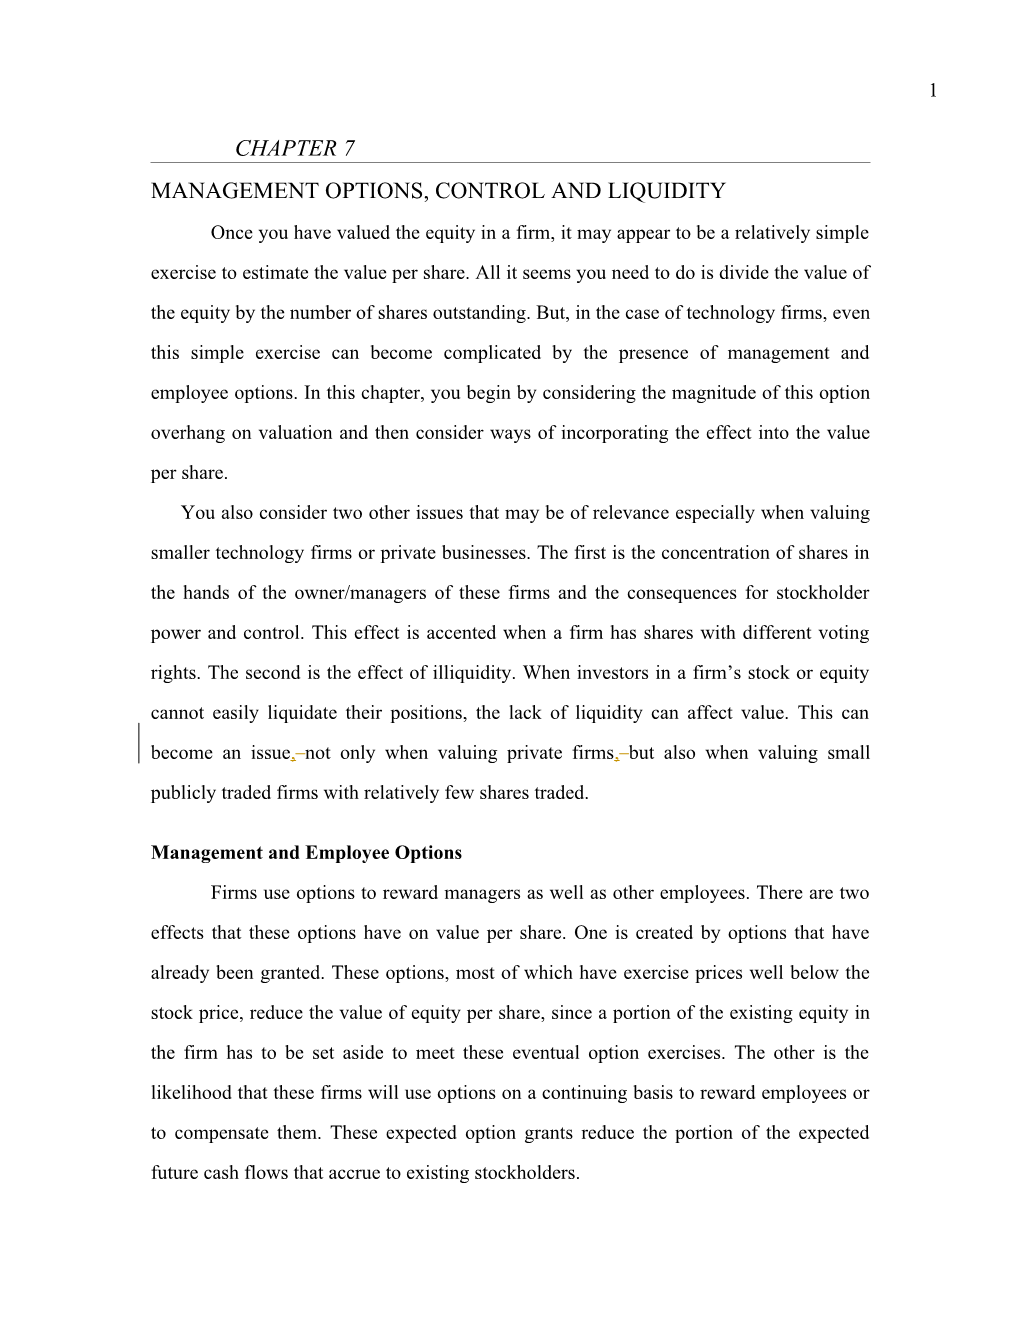 Management Options, Control and Liquidity